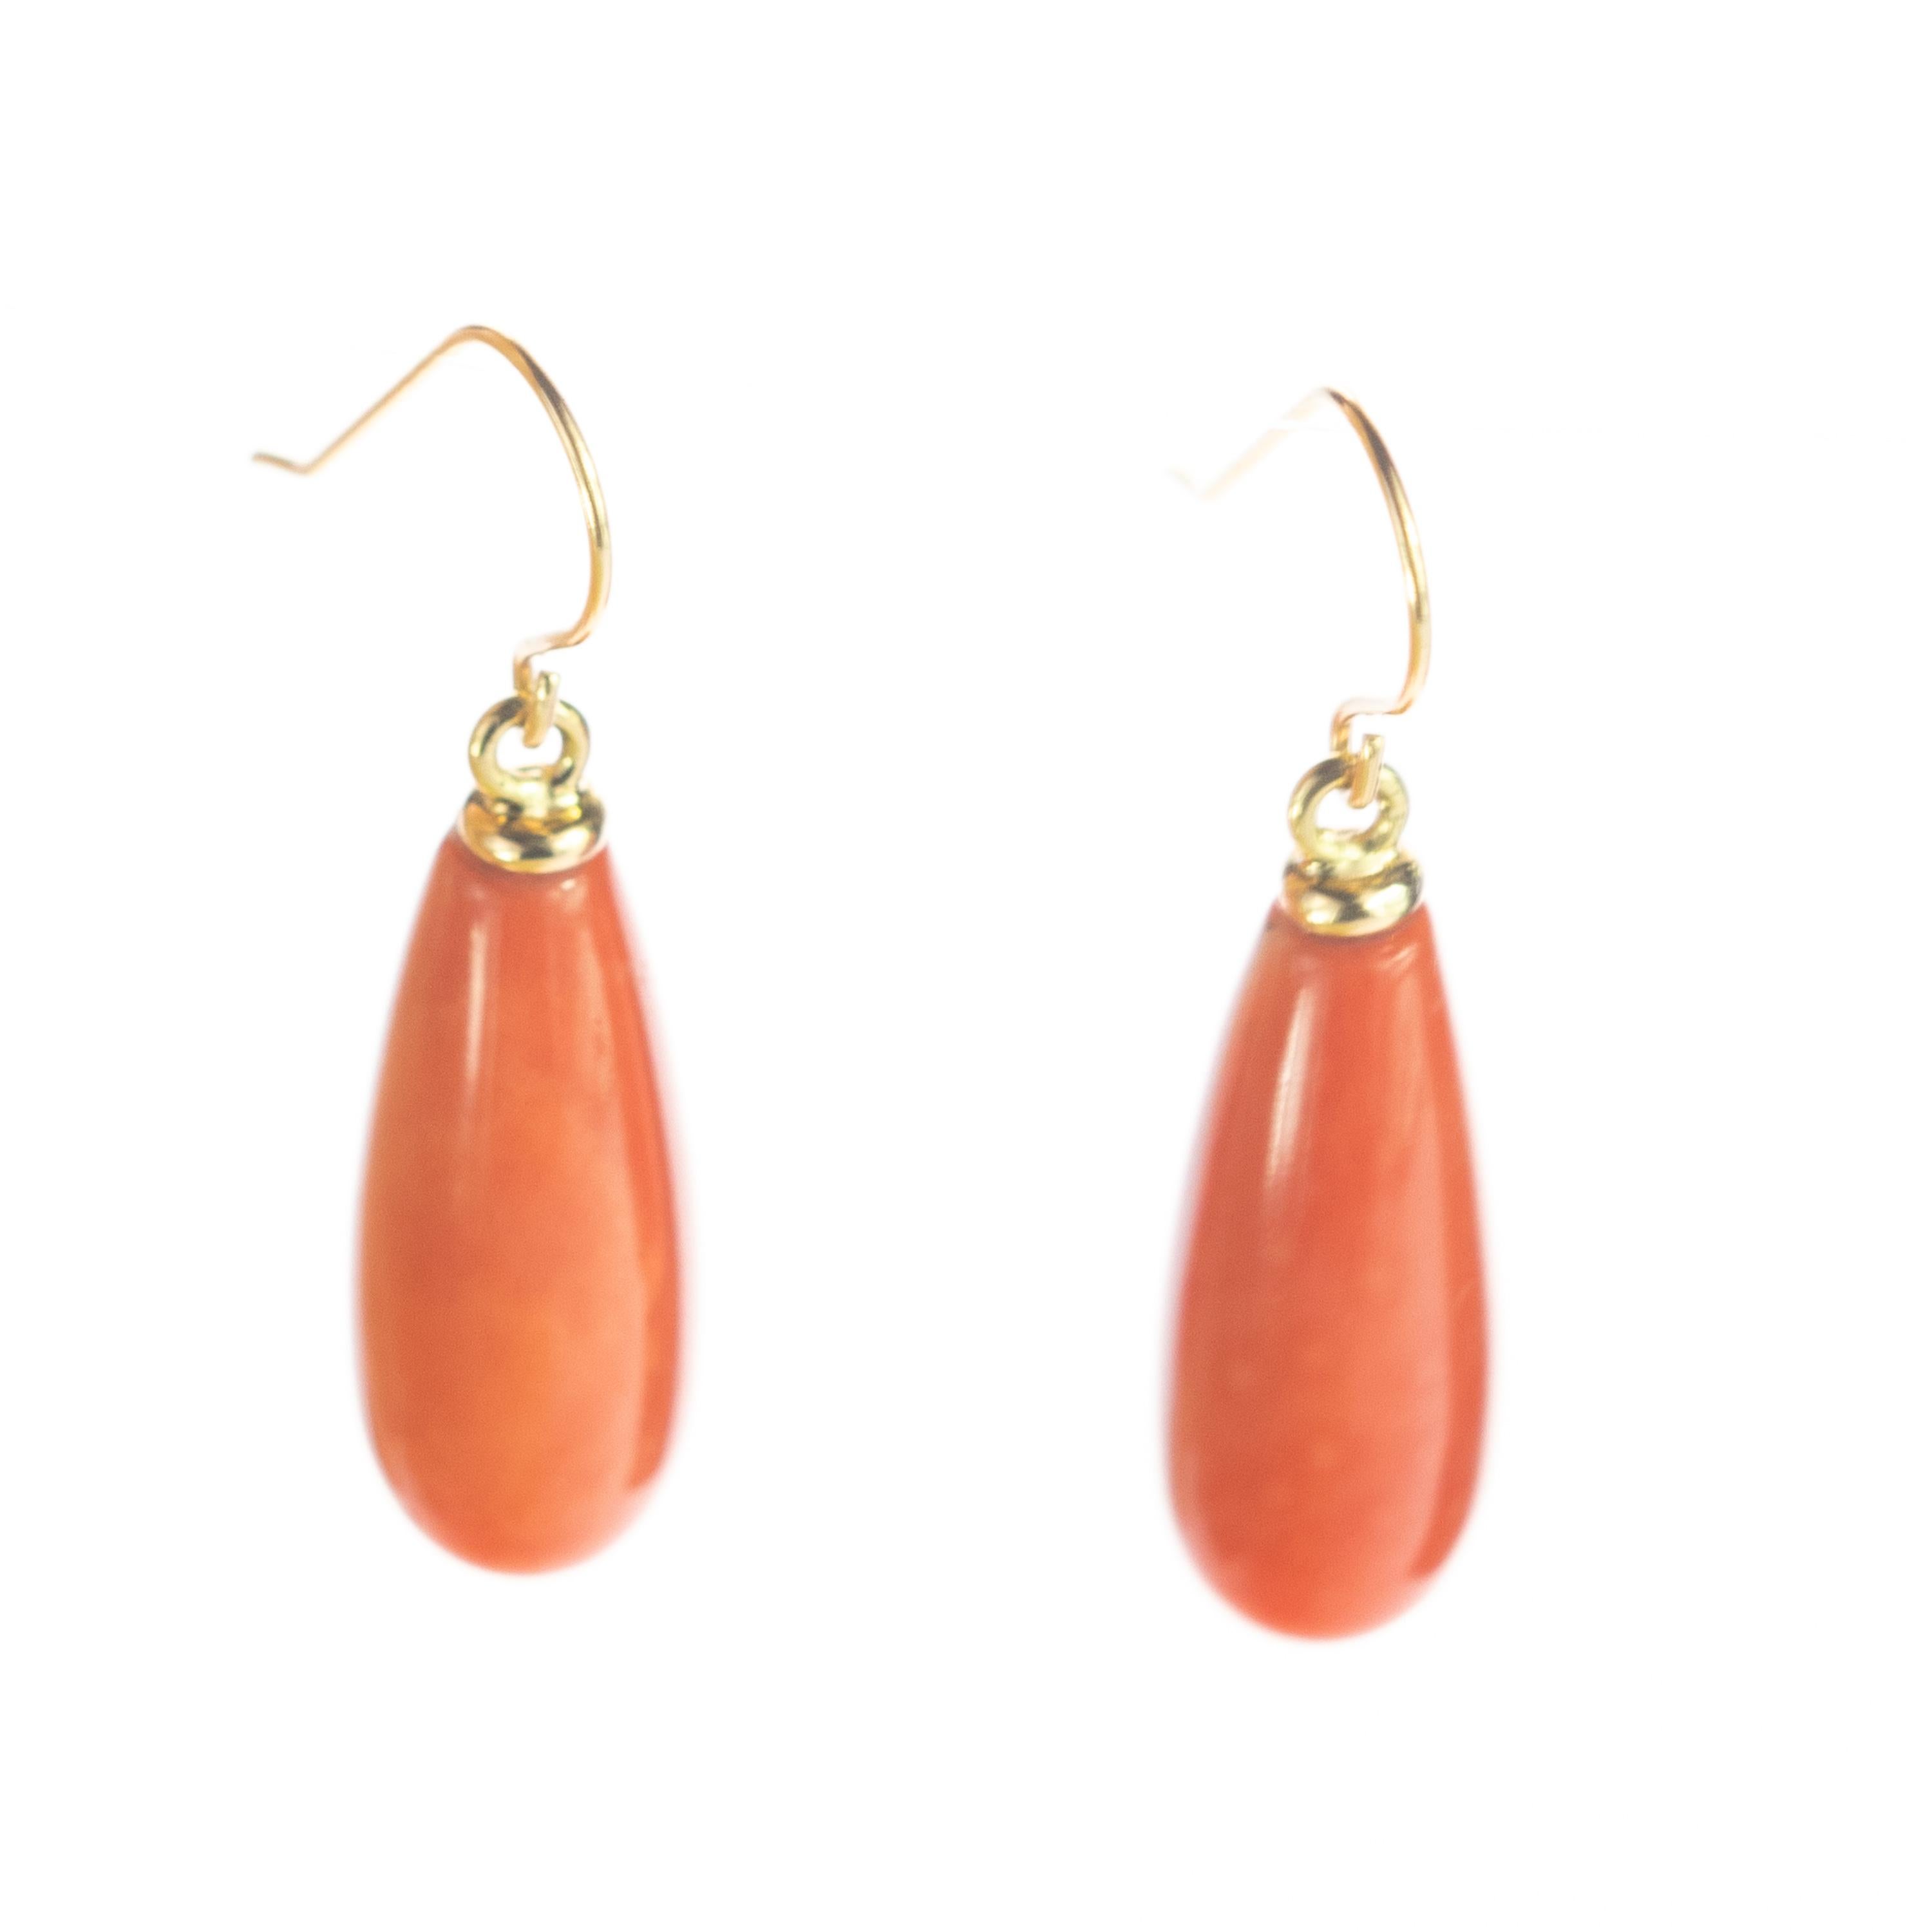 Precious coral drops, hanging from 18 karat yellow gold delicate ear wires. This stunning masterpiece with high quality craftsmanship was born in the Intini Jewels workshop. Our designers add all the Italian modern style and glamour in one exquisite